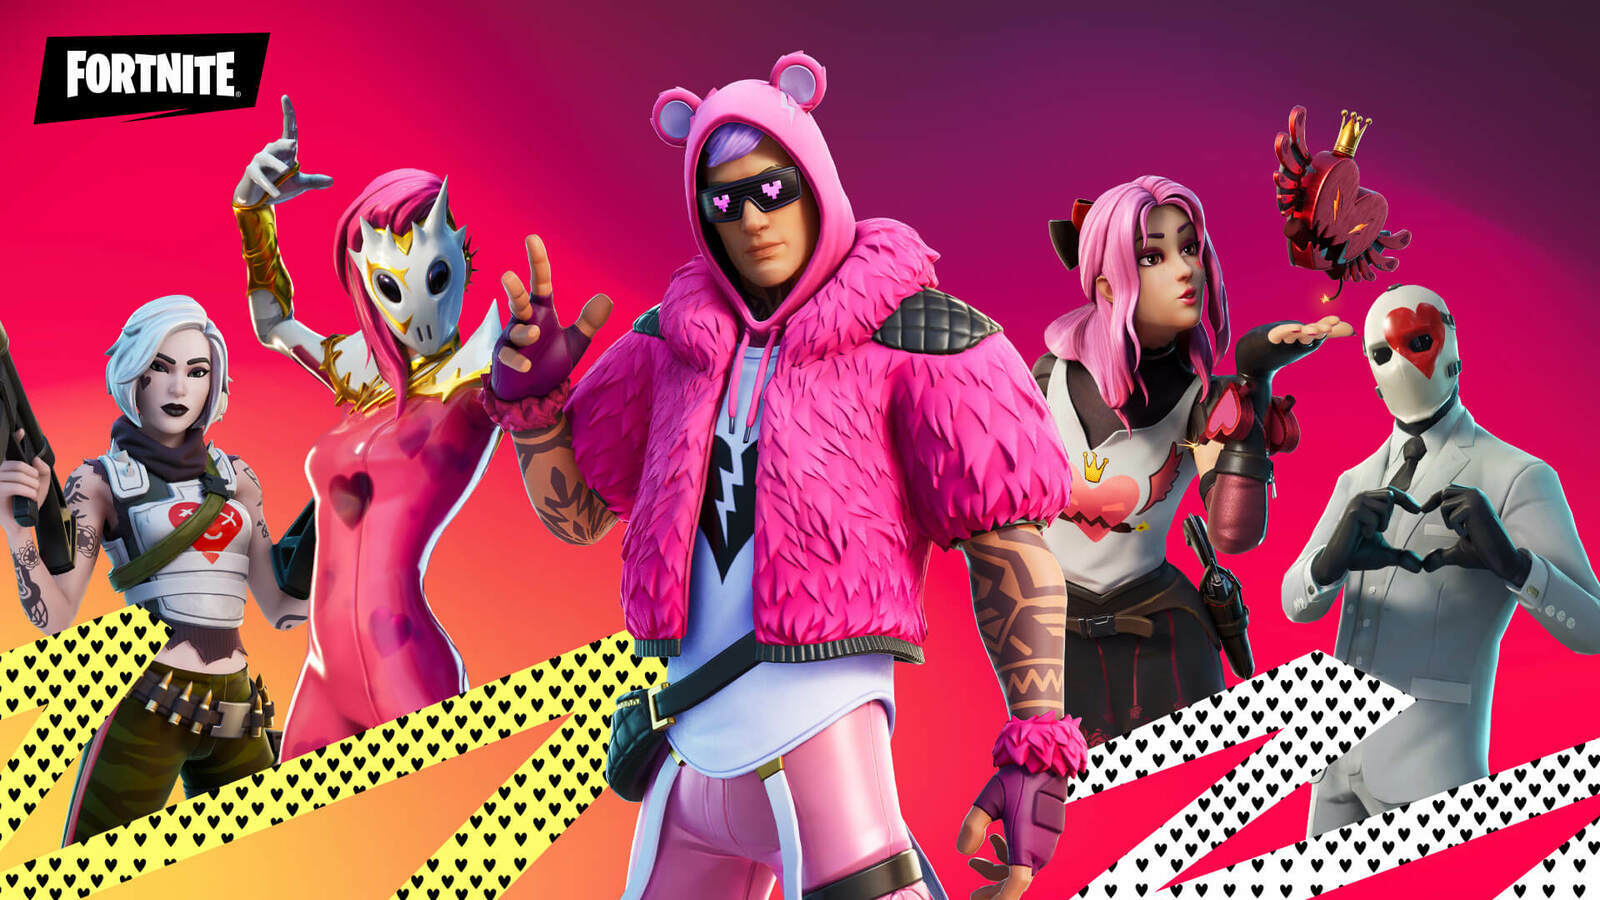 Fortnite Girl with Blue Hair and Pink Gun - wide 1